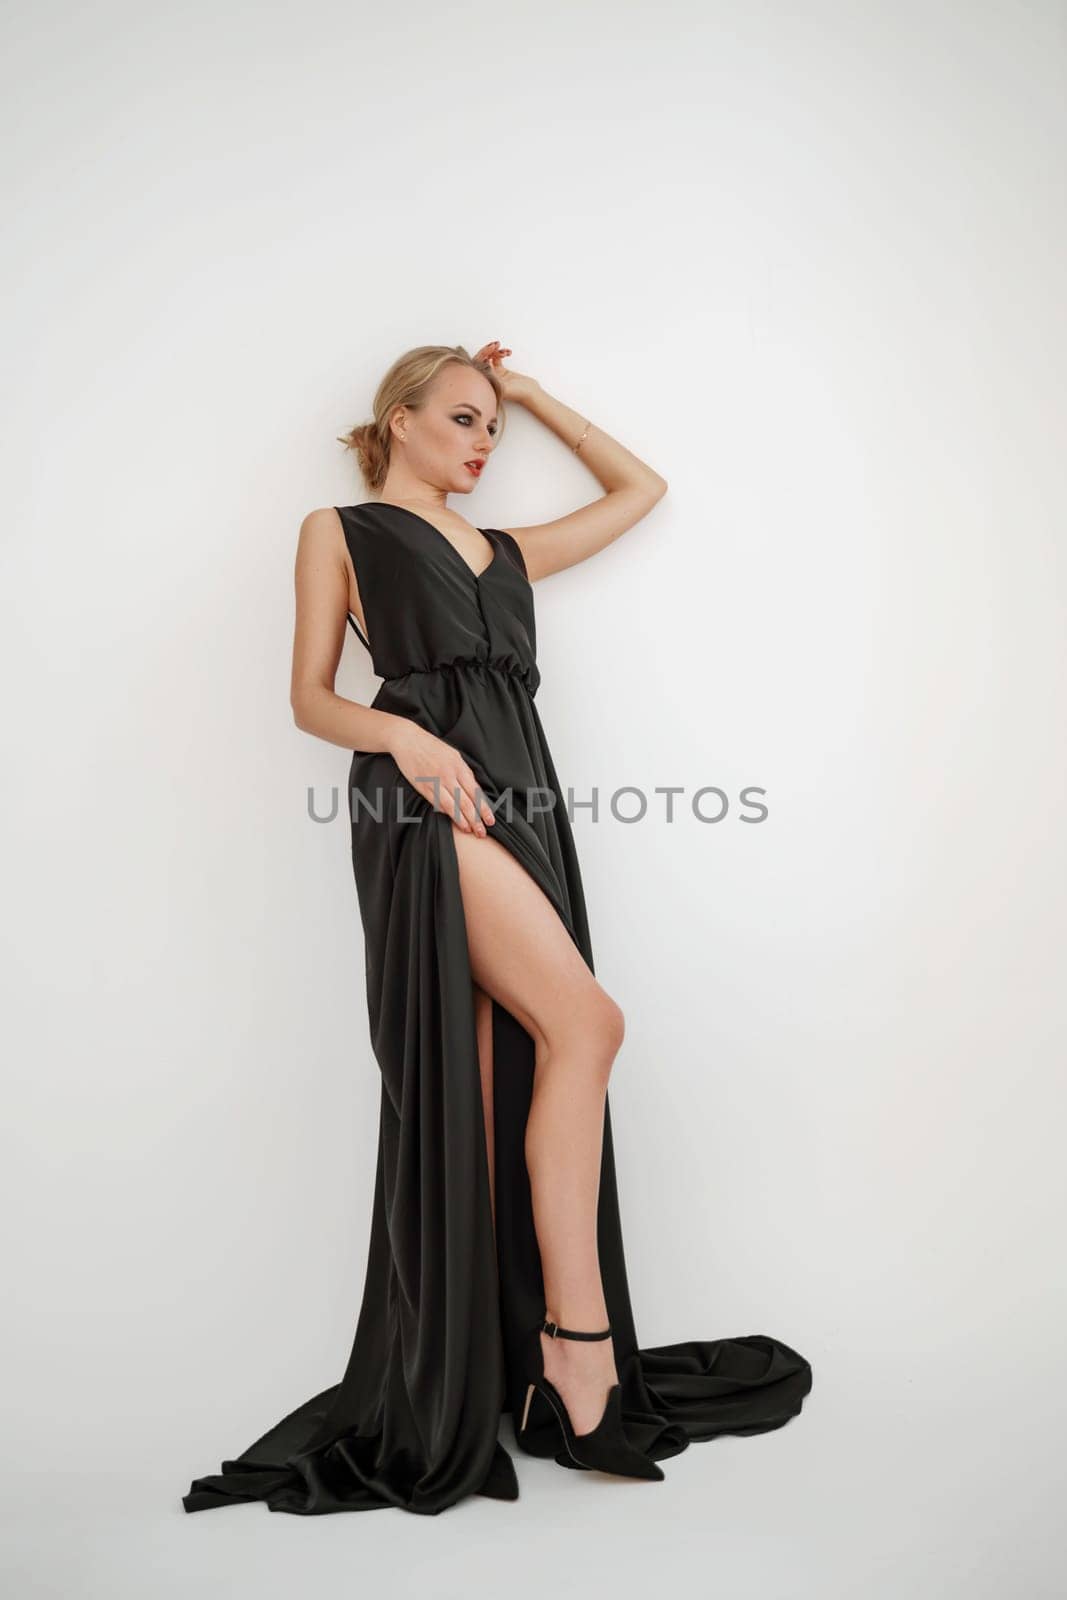 Woman in black dress on white background in the studio. Elegant lady in long gown showing leg. Sexy girl in formal high slit prom dress